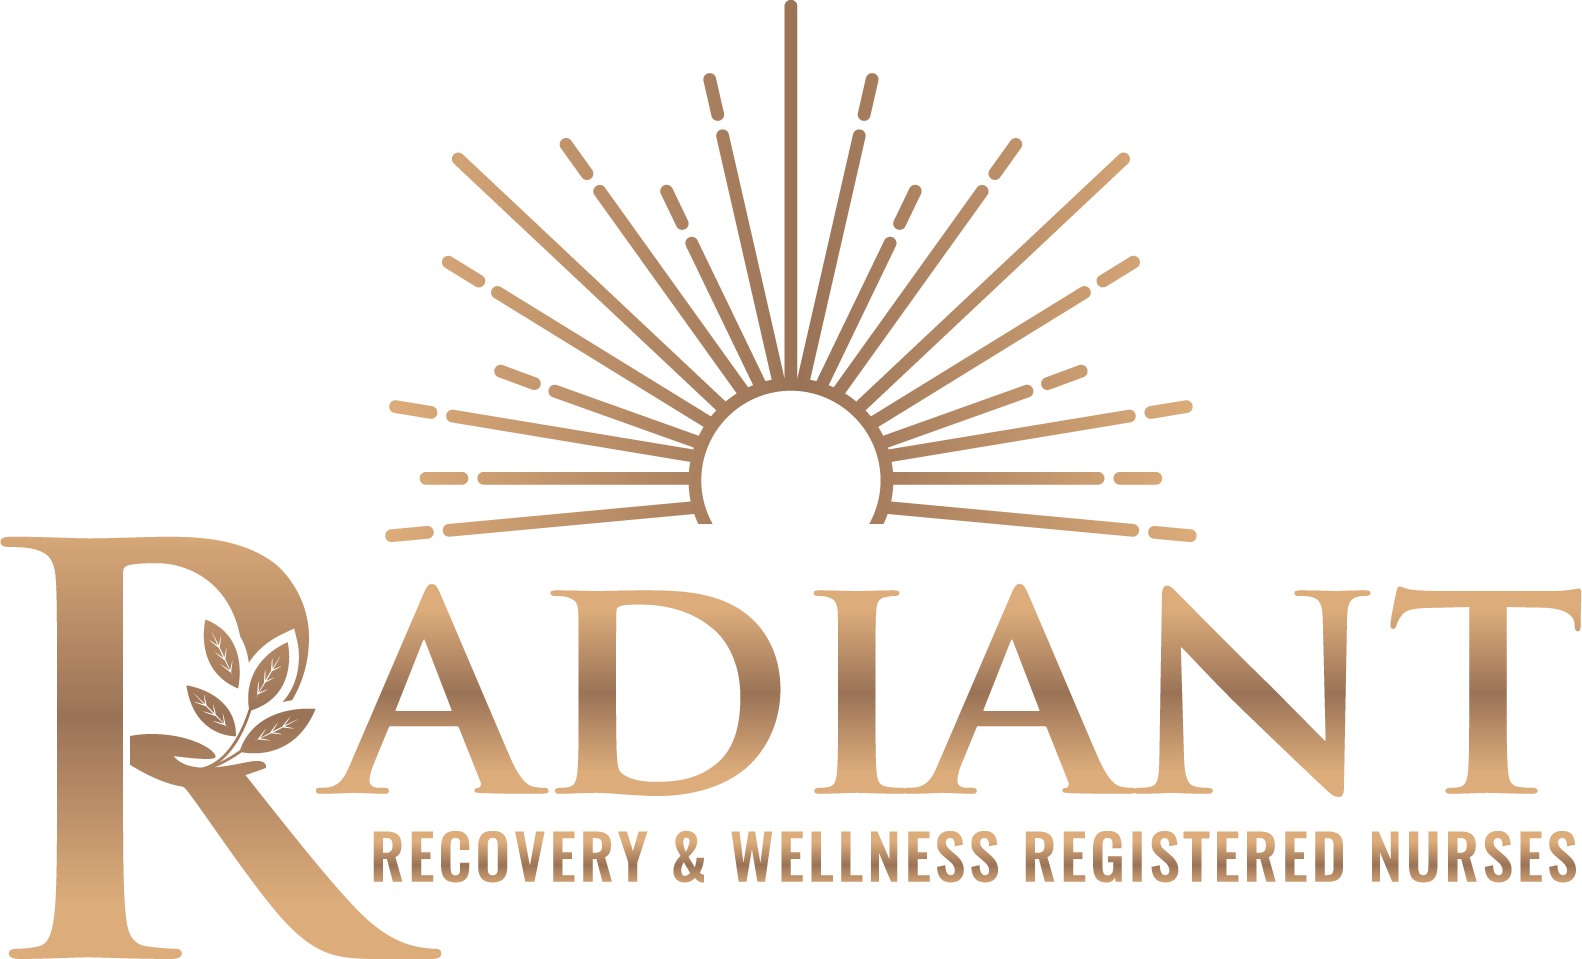 Home - Radiant Recovery & Wellness